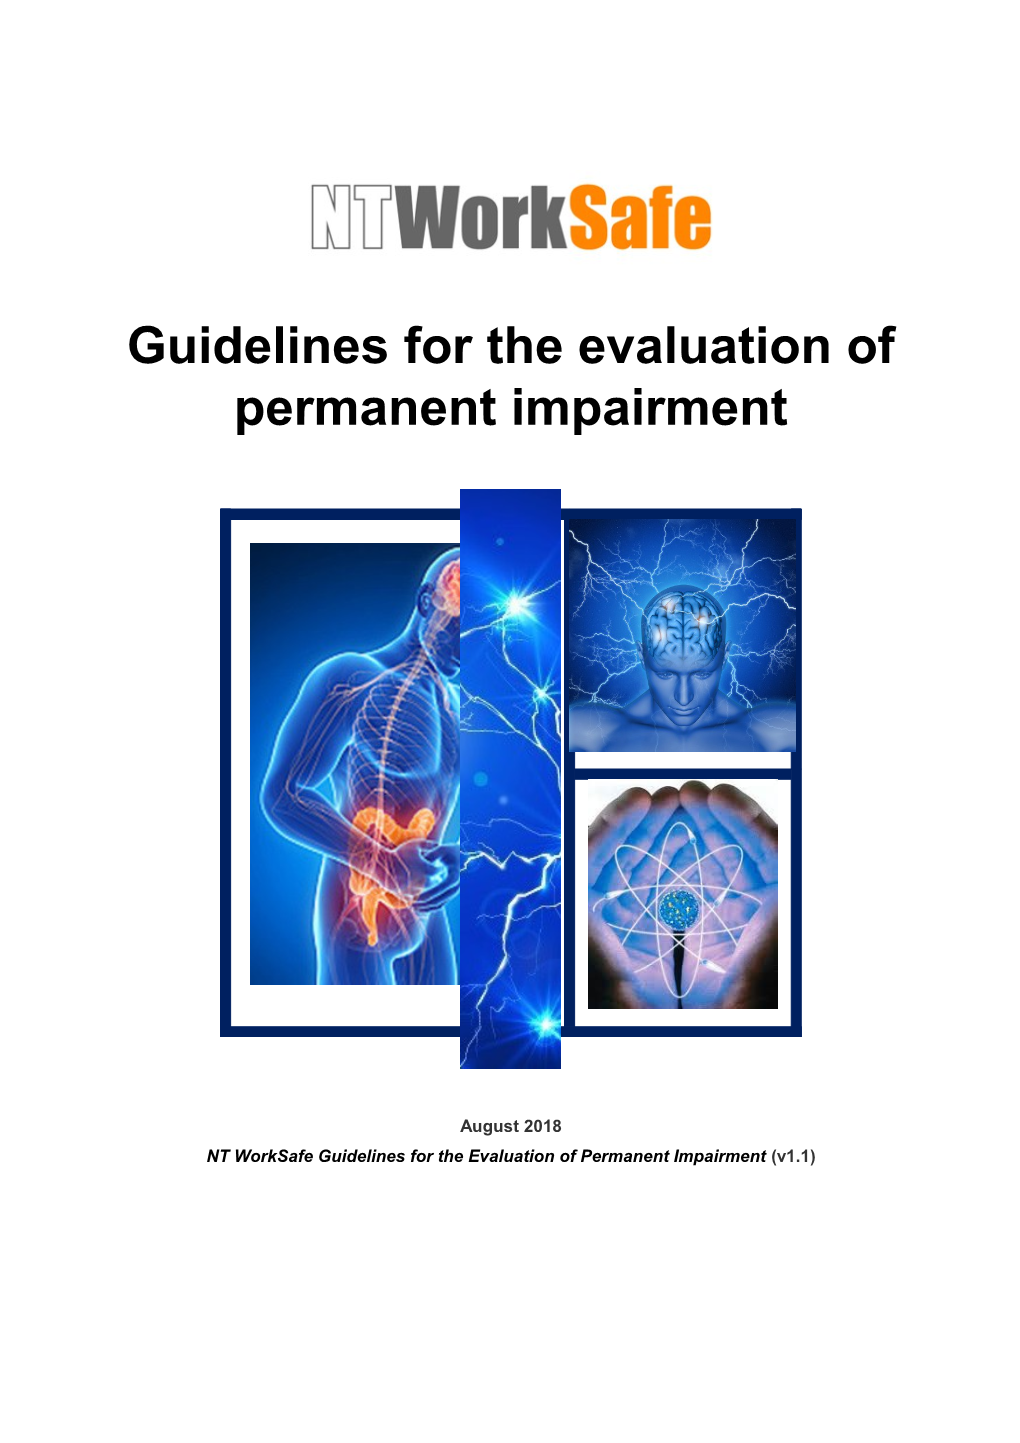 NT Worksafe Guidelines for the Evaluation of Permanent Impairment